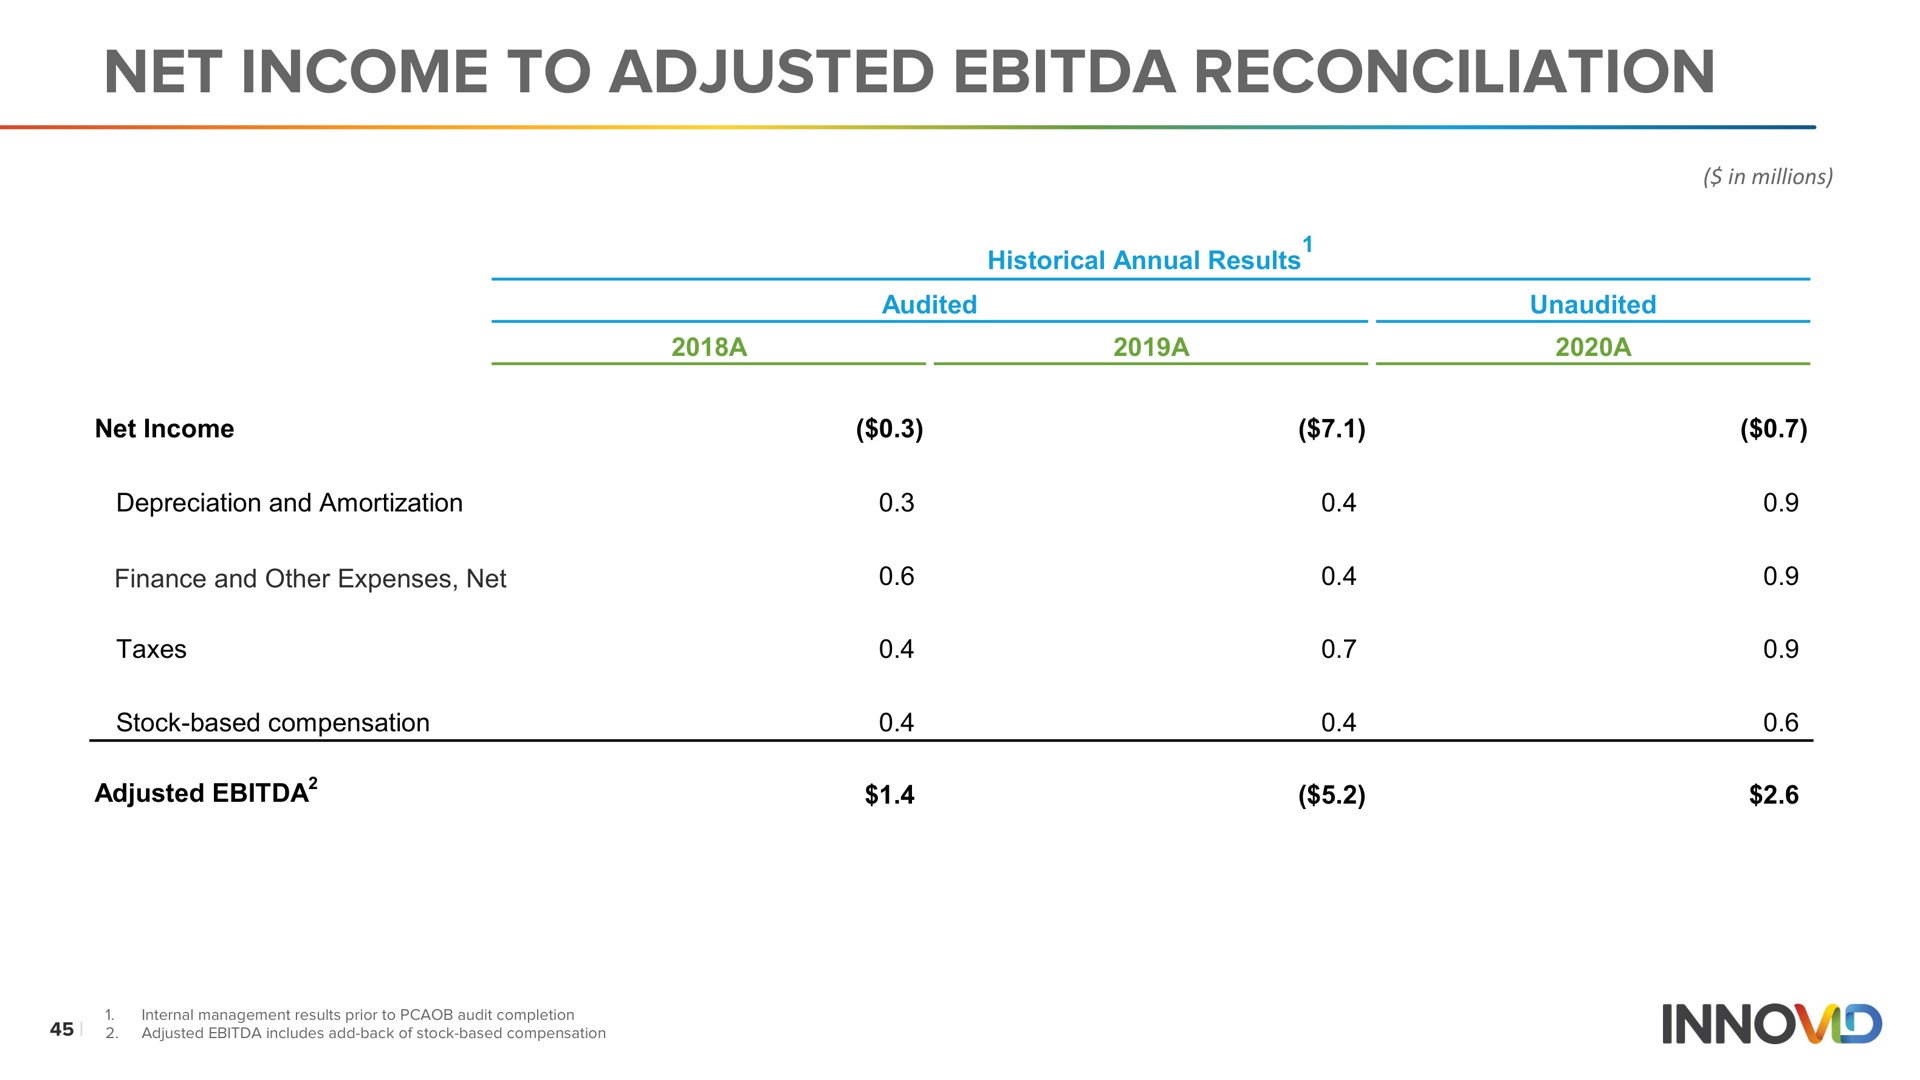 net income to adjusted reconciliation | Innovid